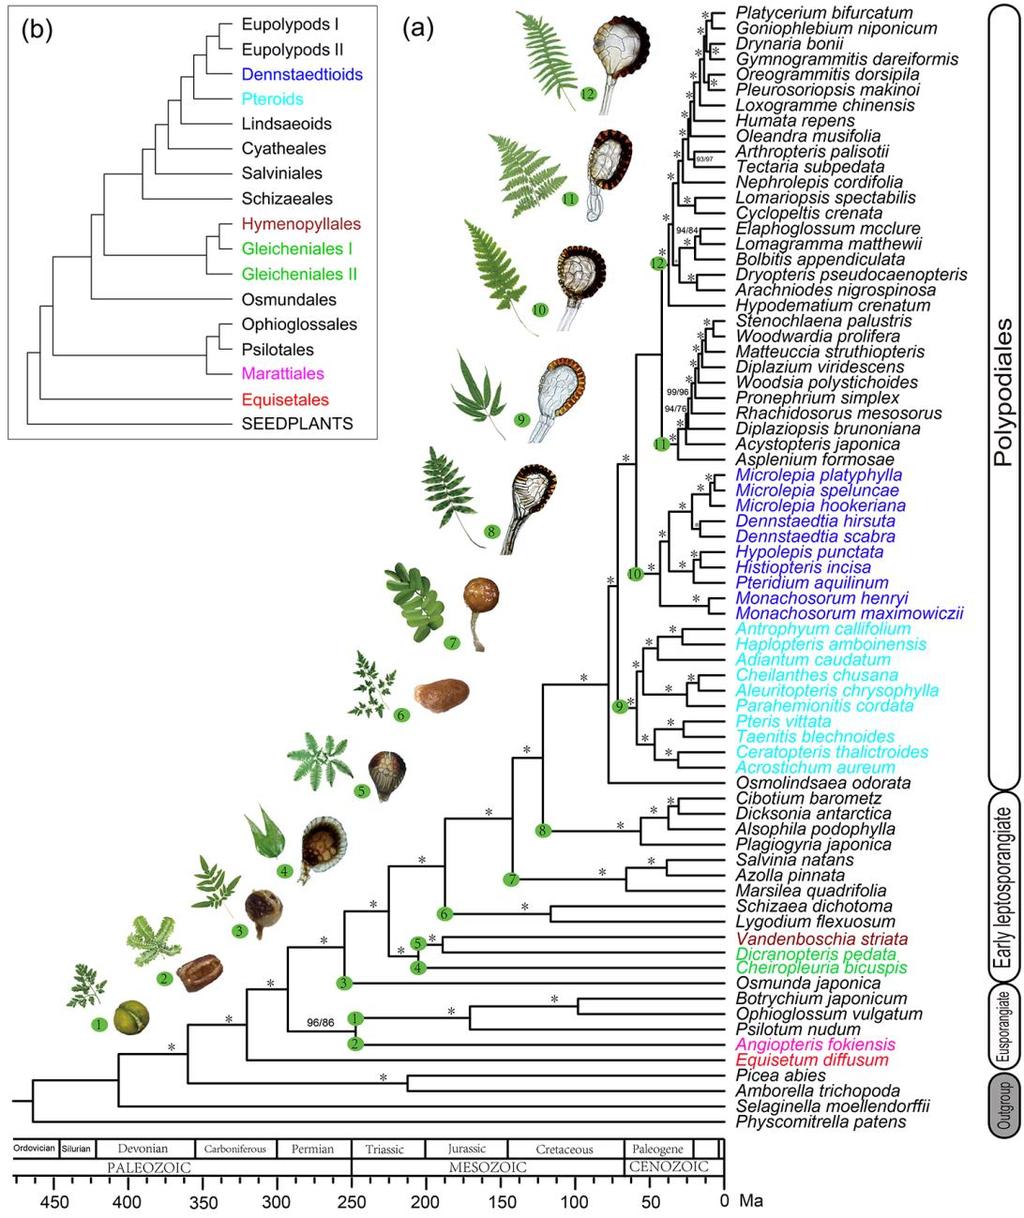 Figure 3. Phylogeny of ferns reconstructed by coalescent-based method using nucleotide sequence with divergence times calculated.